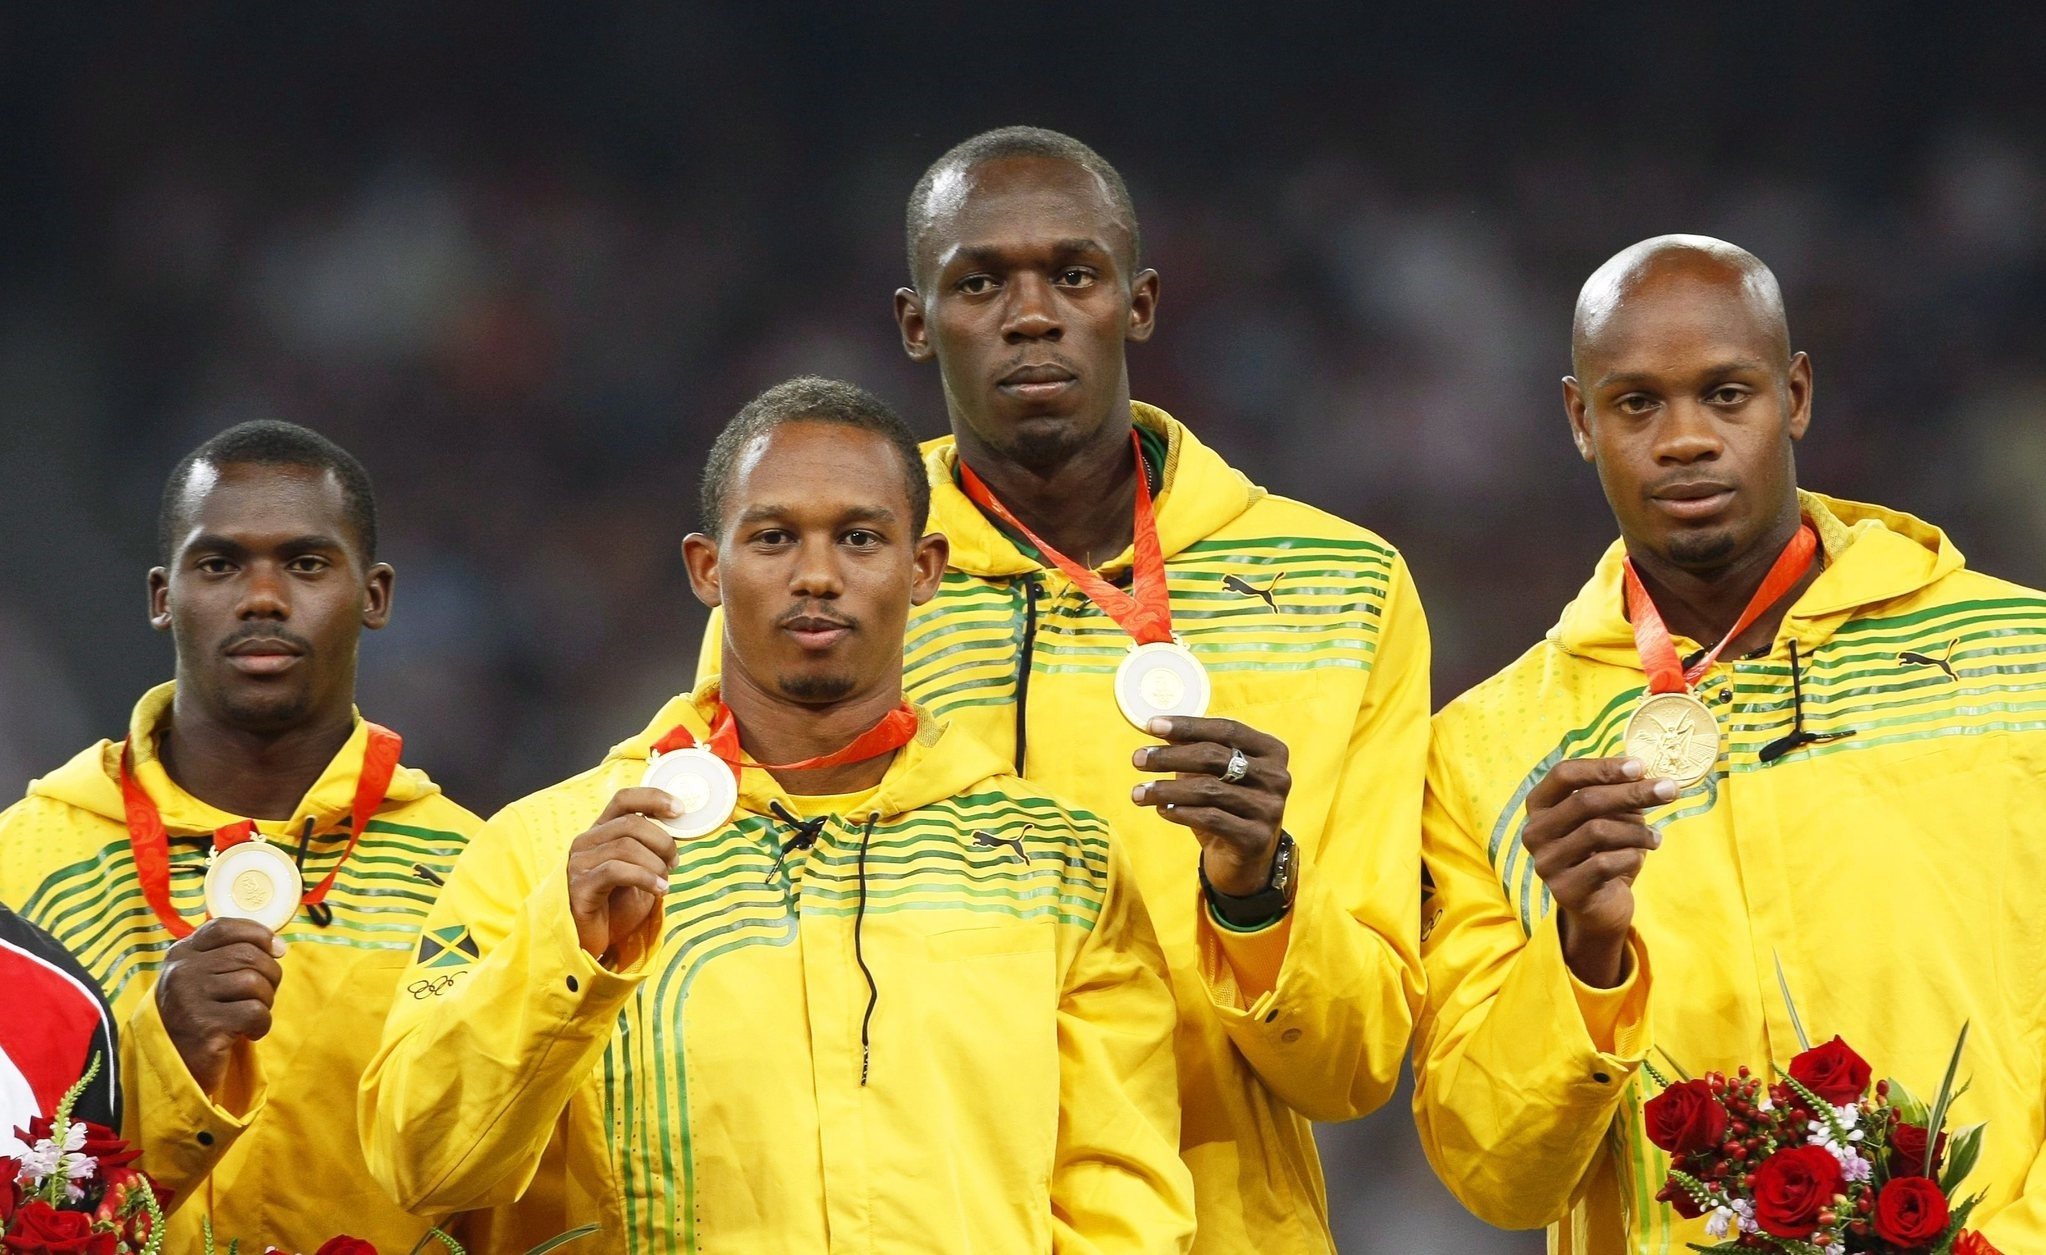 A file picture dated 23 August 2008 of Jamaica's (L-R) Nesta Carter, Michael Frater, Usain Bolt, and Asafa Powell posing with their gold medals. (EPA Photo)